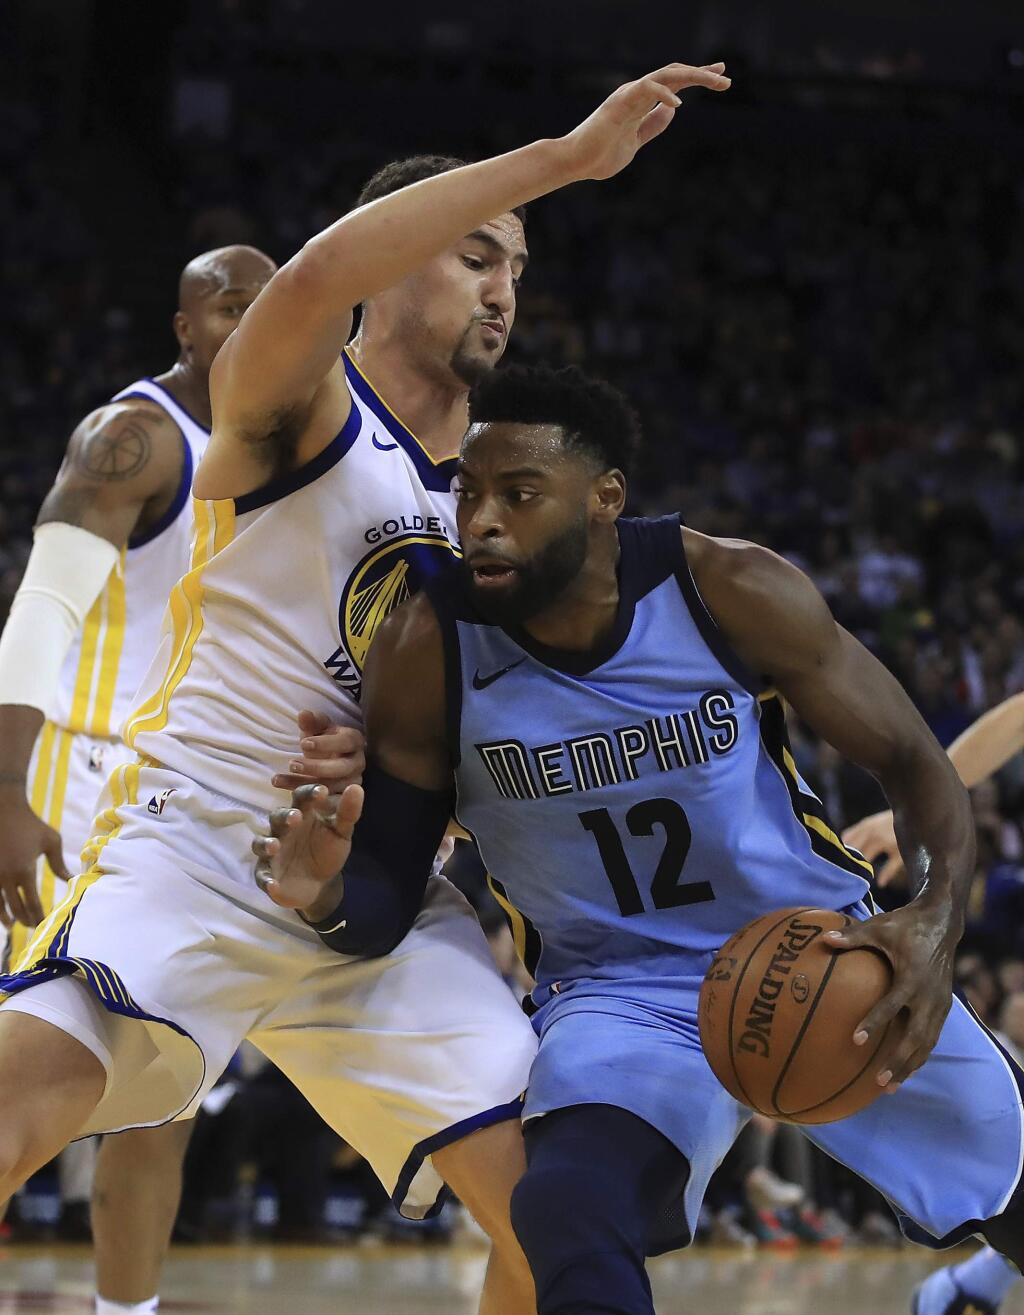 Memphis Grizzlies' Tyreke Evans (12) drives the ball against Golden State Warriors' Klay Thompson during the first half of an NBA basketball game Wednesday, Dec. 20, 2017, in Oakland, Calif. (AP Photo/Ben Margot)